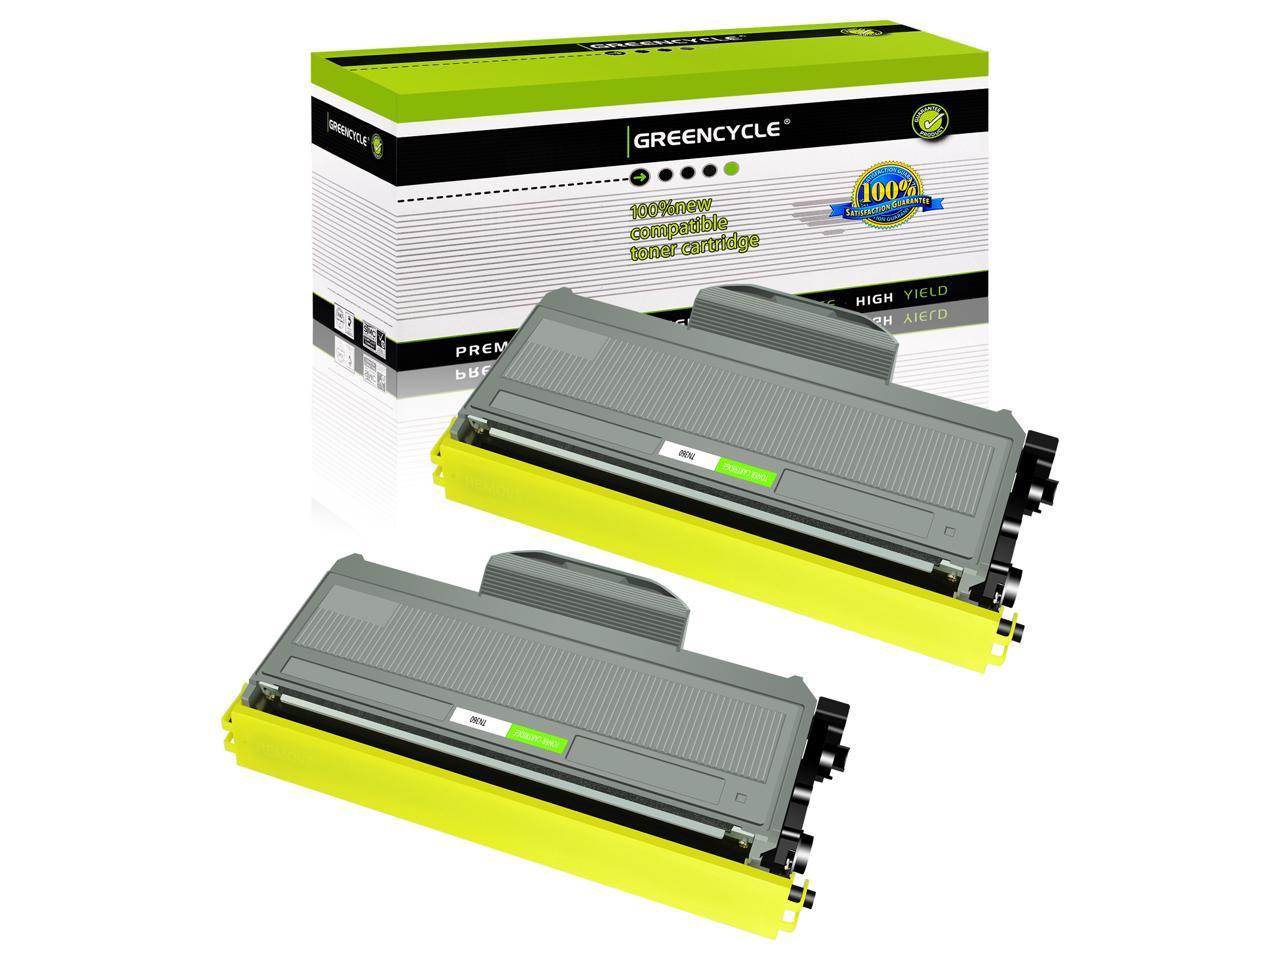 Black, 2-Pack GREENCYCLE 2600 Pages per Toner Cartridge Replacement Compatible for Brother TN360 TN-360 TN330 TN-330 Used in HL-2170W HL-2150N DCP-7045N DCP-7040 MFC-7840W MFC-7340 MFC-7345N